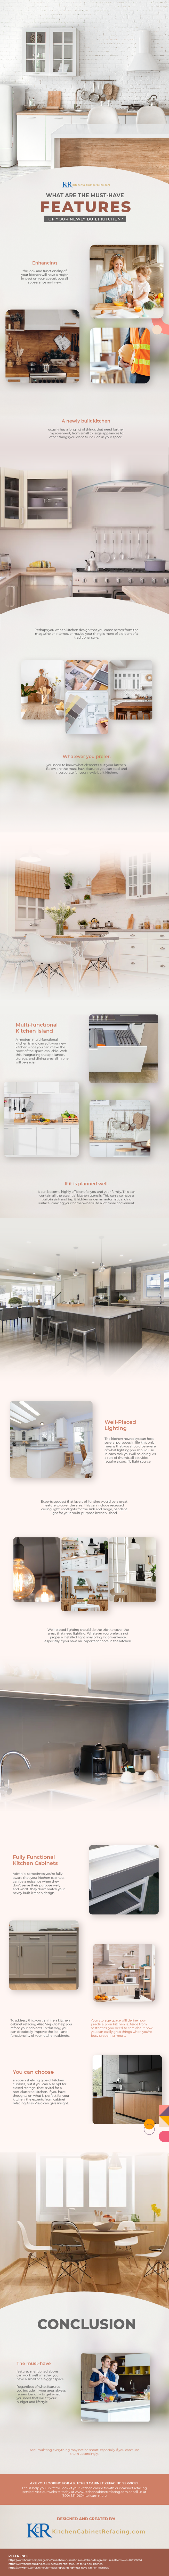 What_are_the_Must-Have_Features_of_Your_Newly_Built_Kitchen_infographic_image